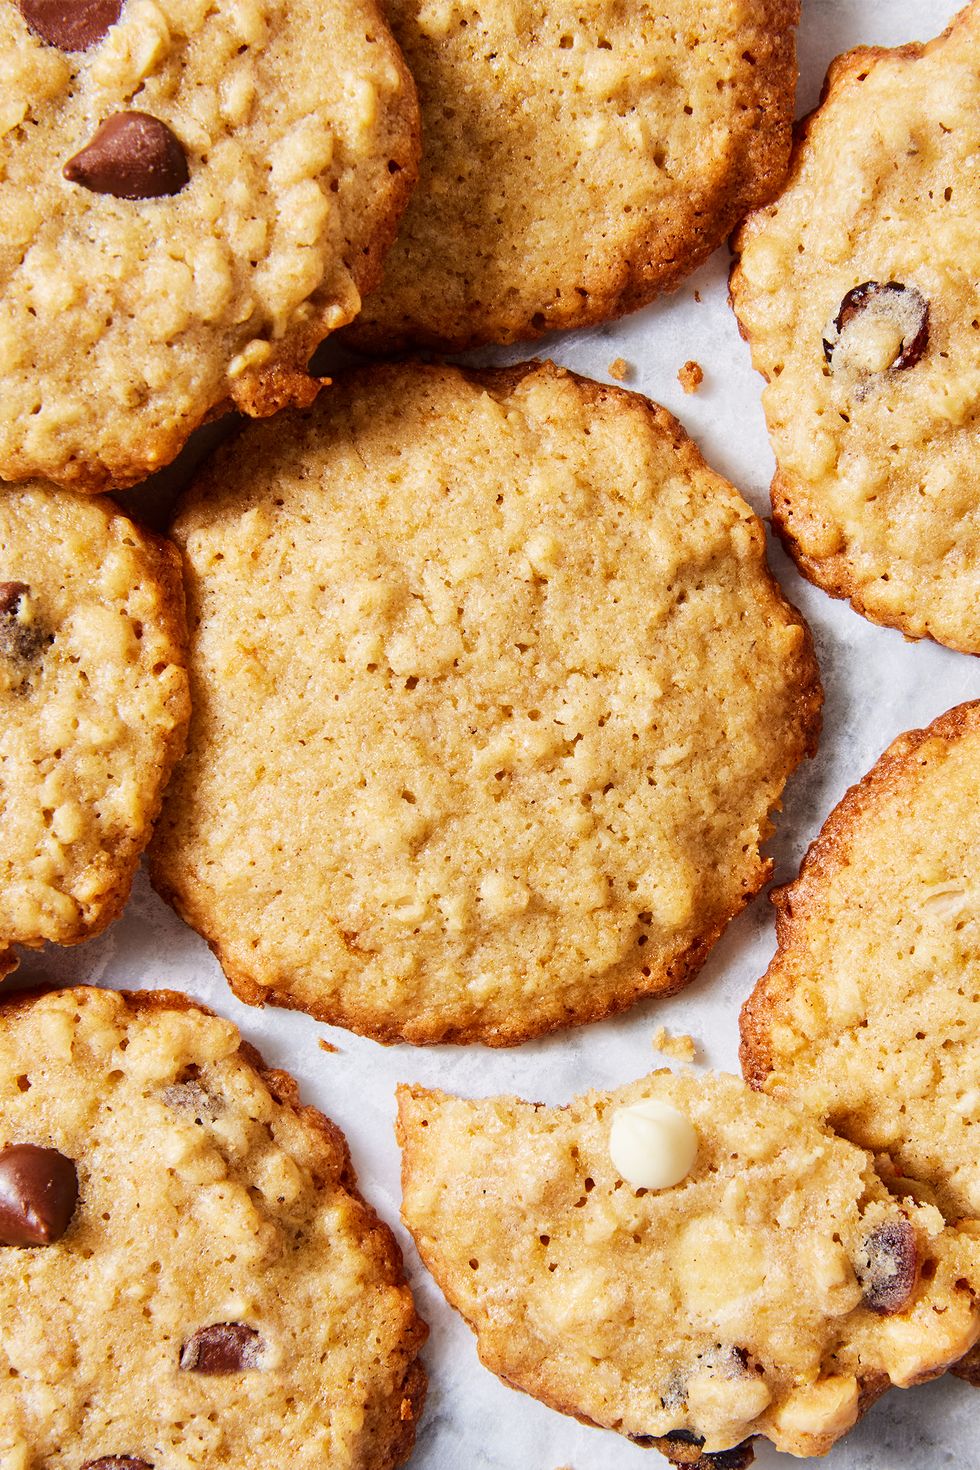 thin and crispy oatmeal cookies with chocolate chips, raisins, and white chocolate chips